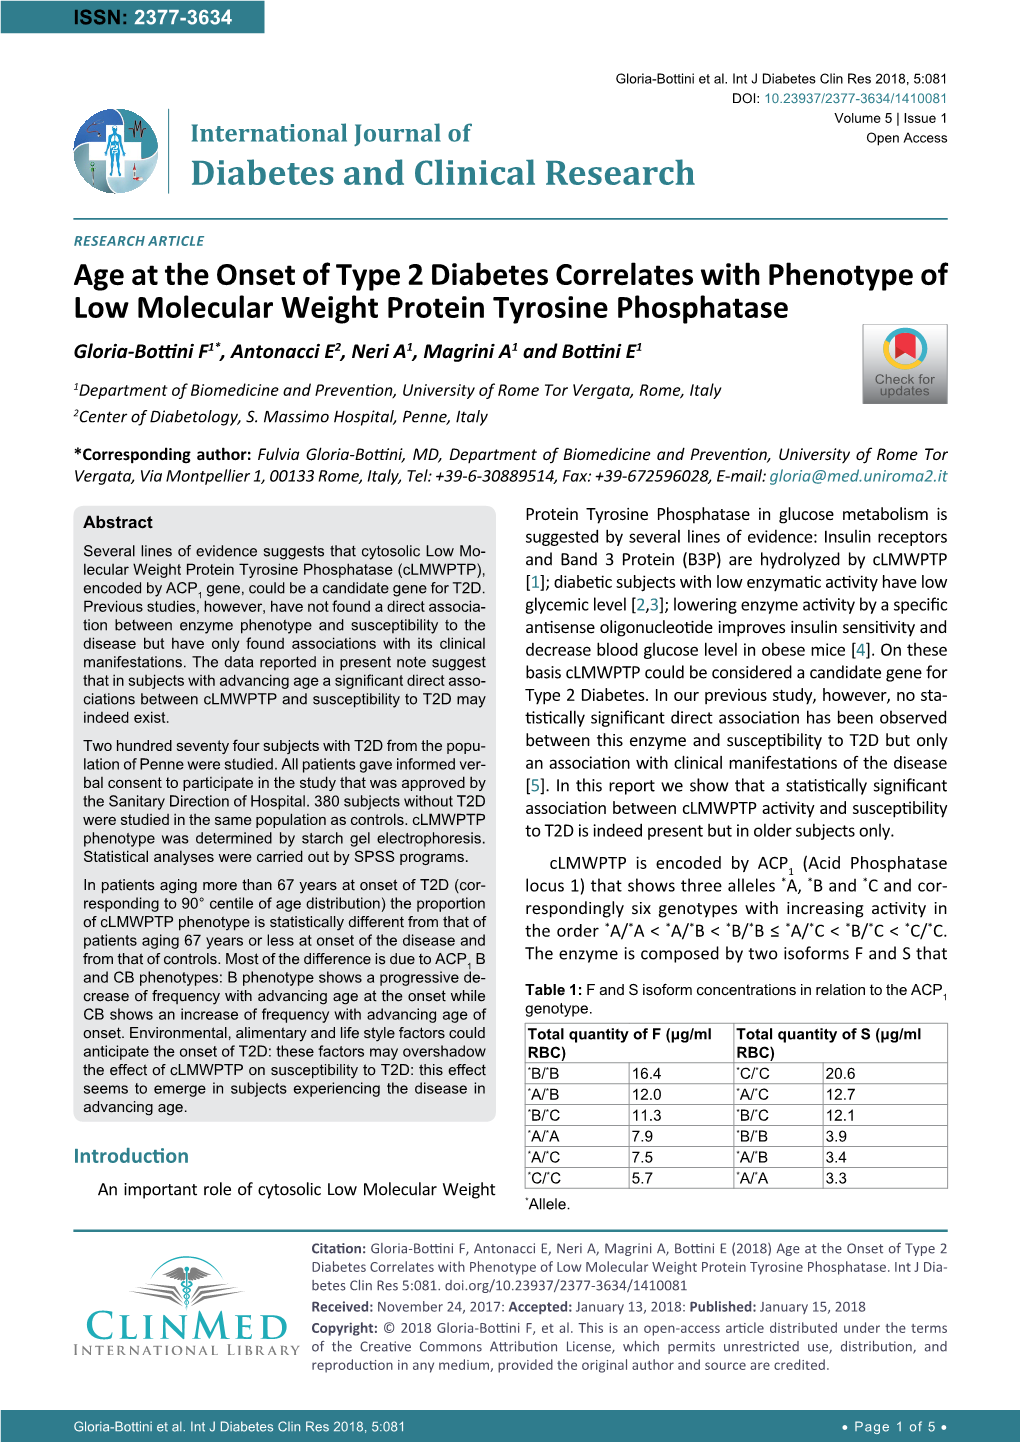 Age at the Onset of Type 2 Diabetes Correlates with Phenotype of Low